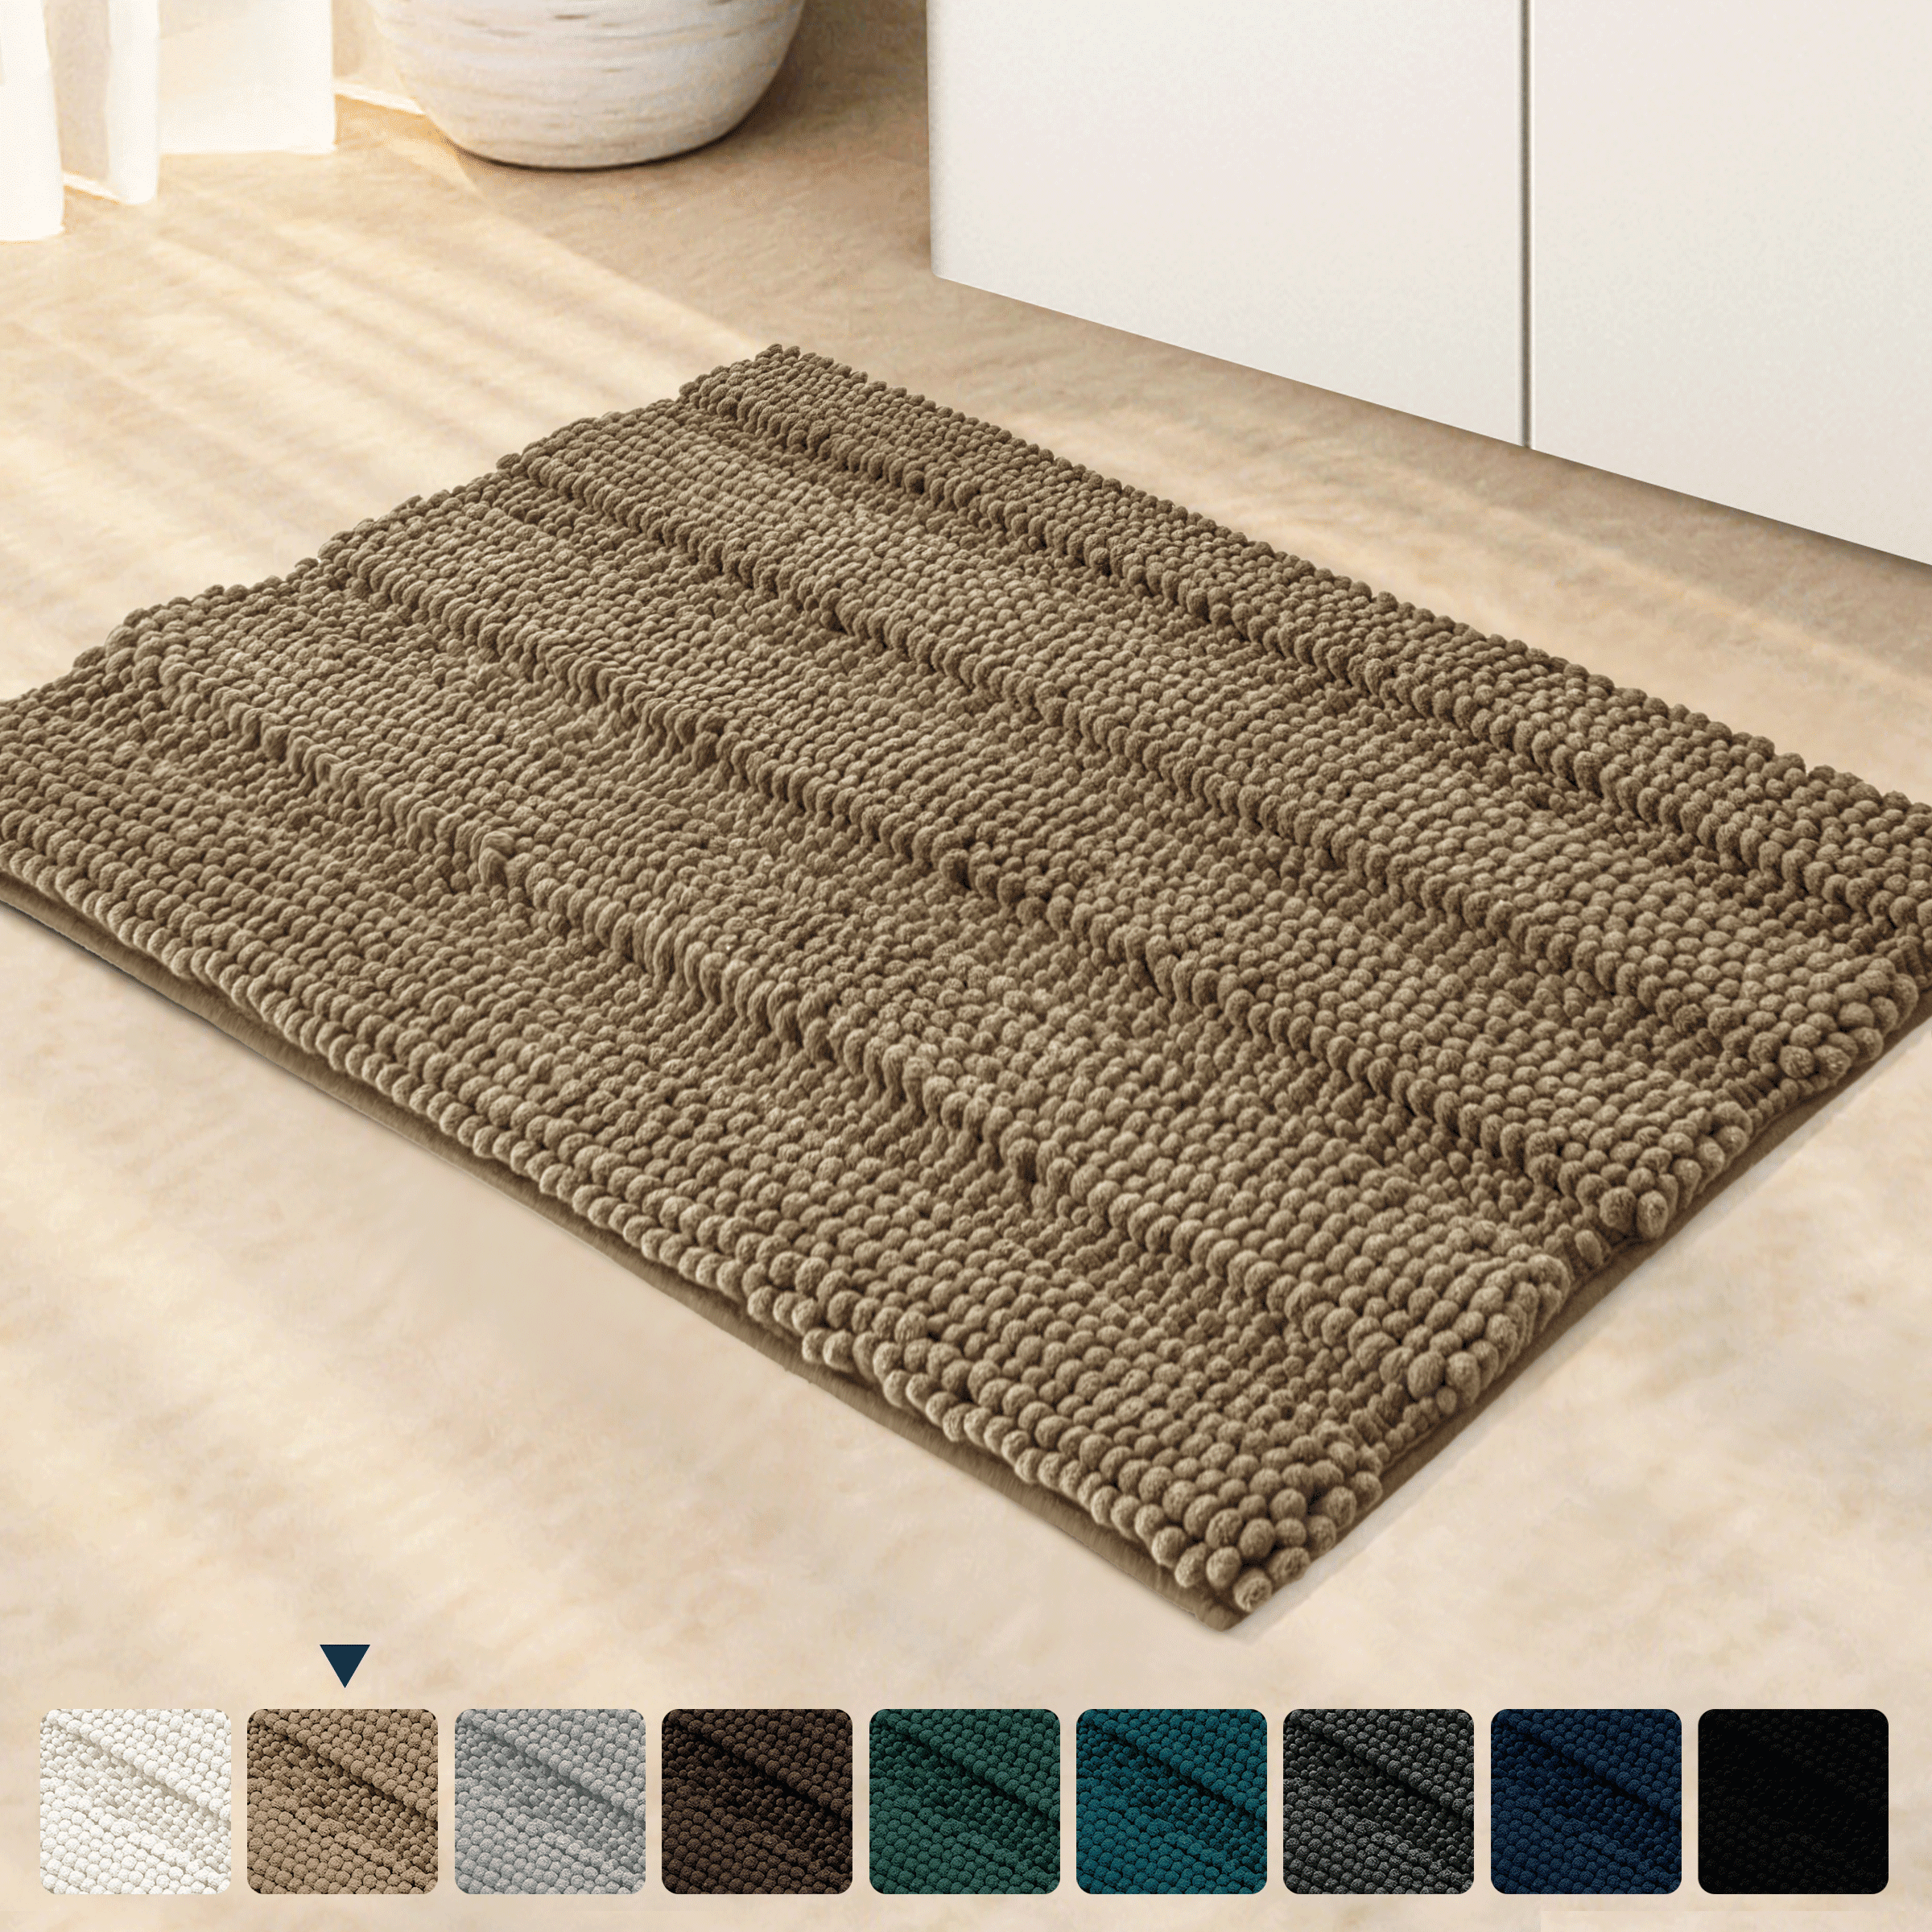 Soft and Durable Microfiber Bathroom Shower Accent Rug 30" x 18" Brown 